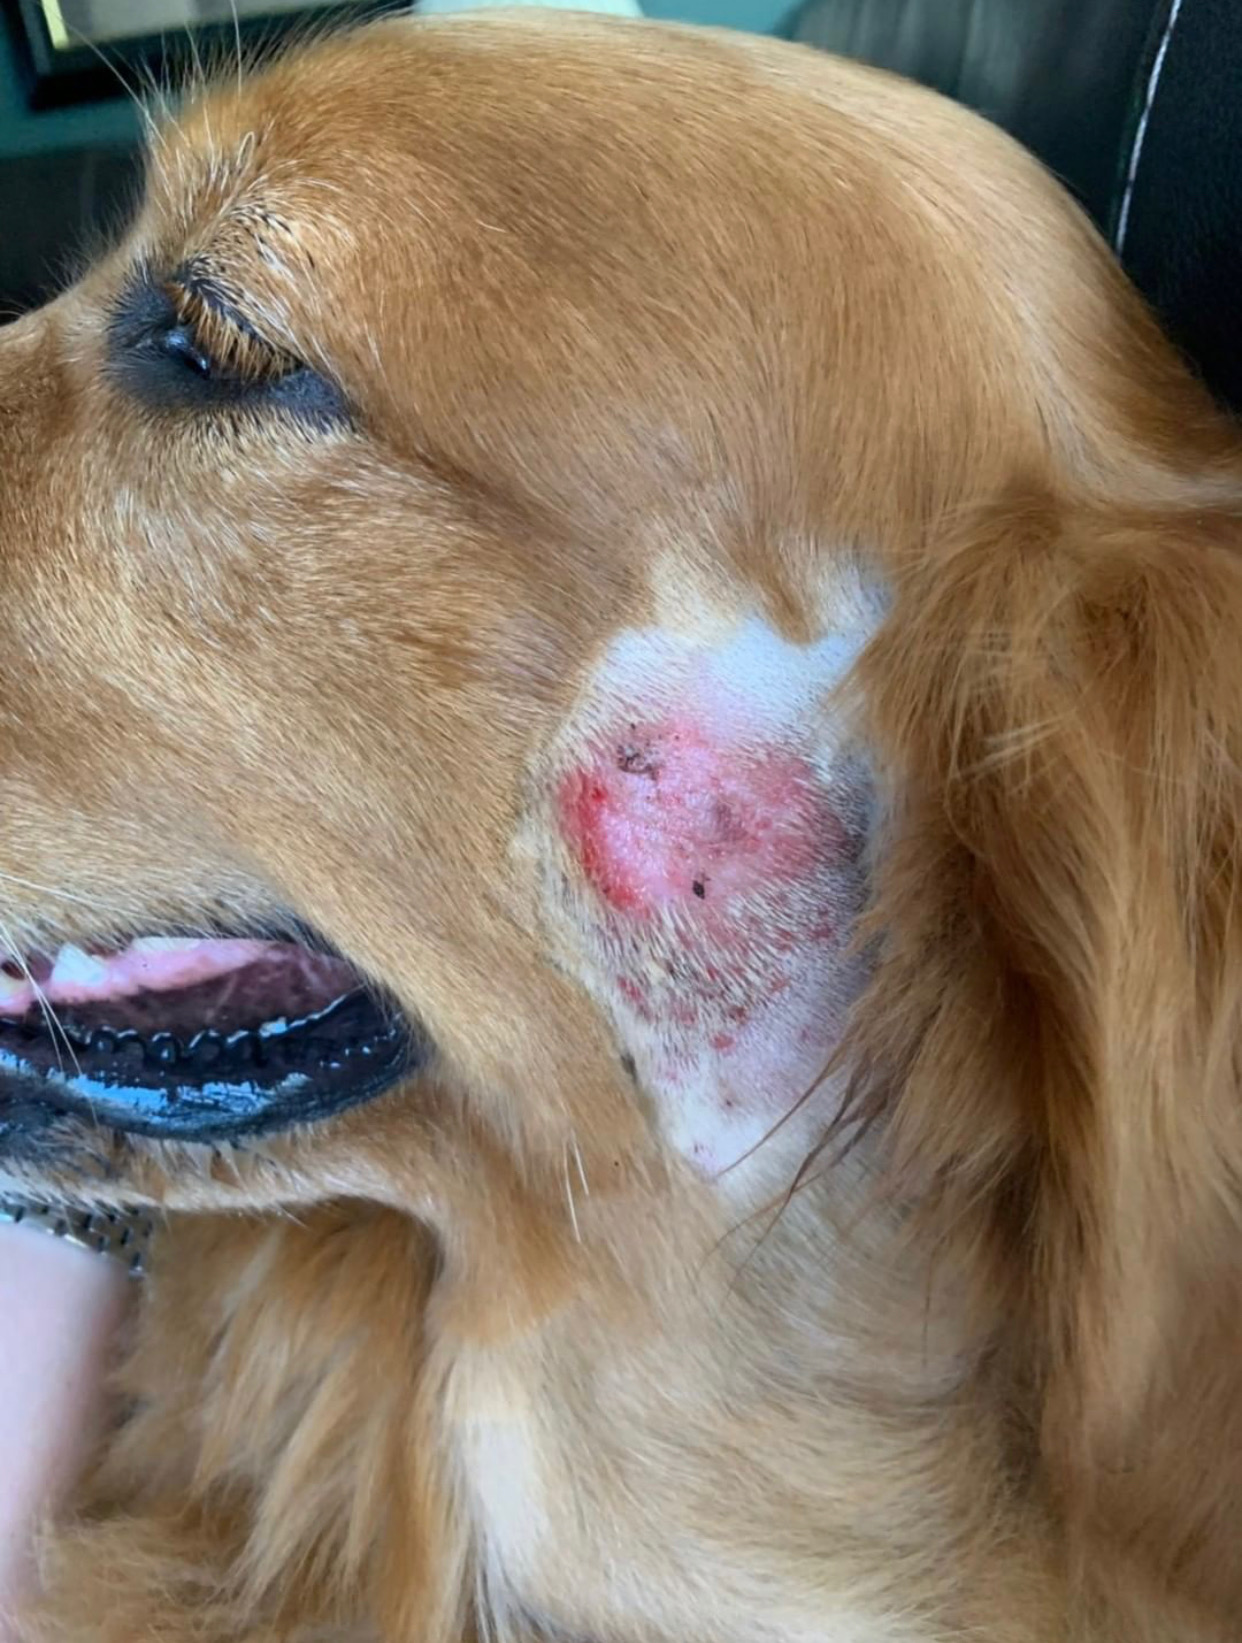 how did my dog get a bacterial infection